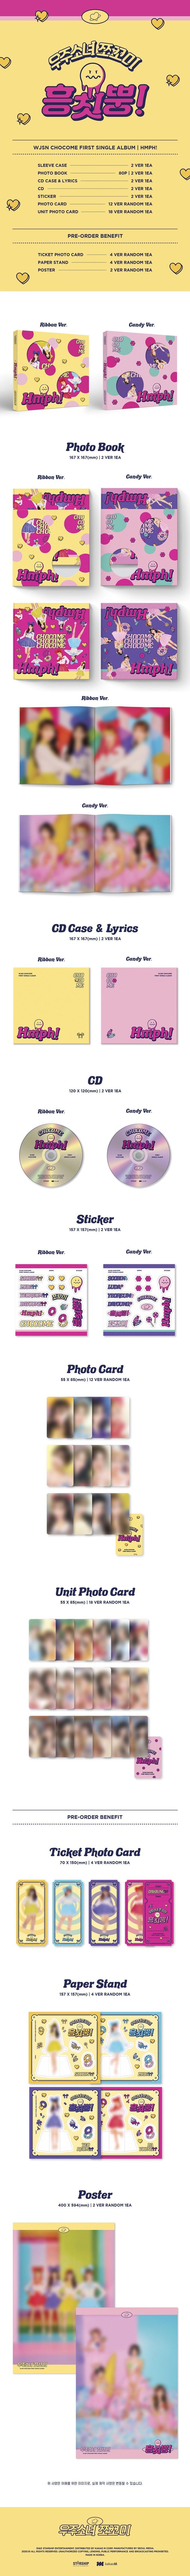 1 CD
1 Photo Book (80 pages)
1 Sticker
1 Photo Card
1 Unit Card